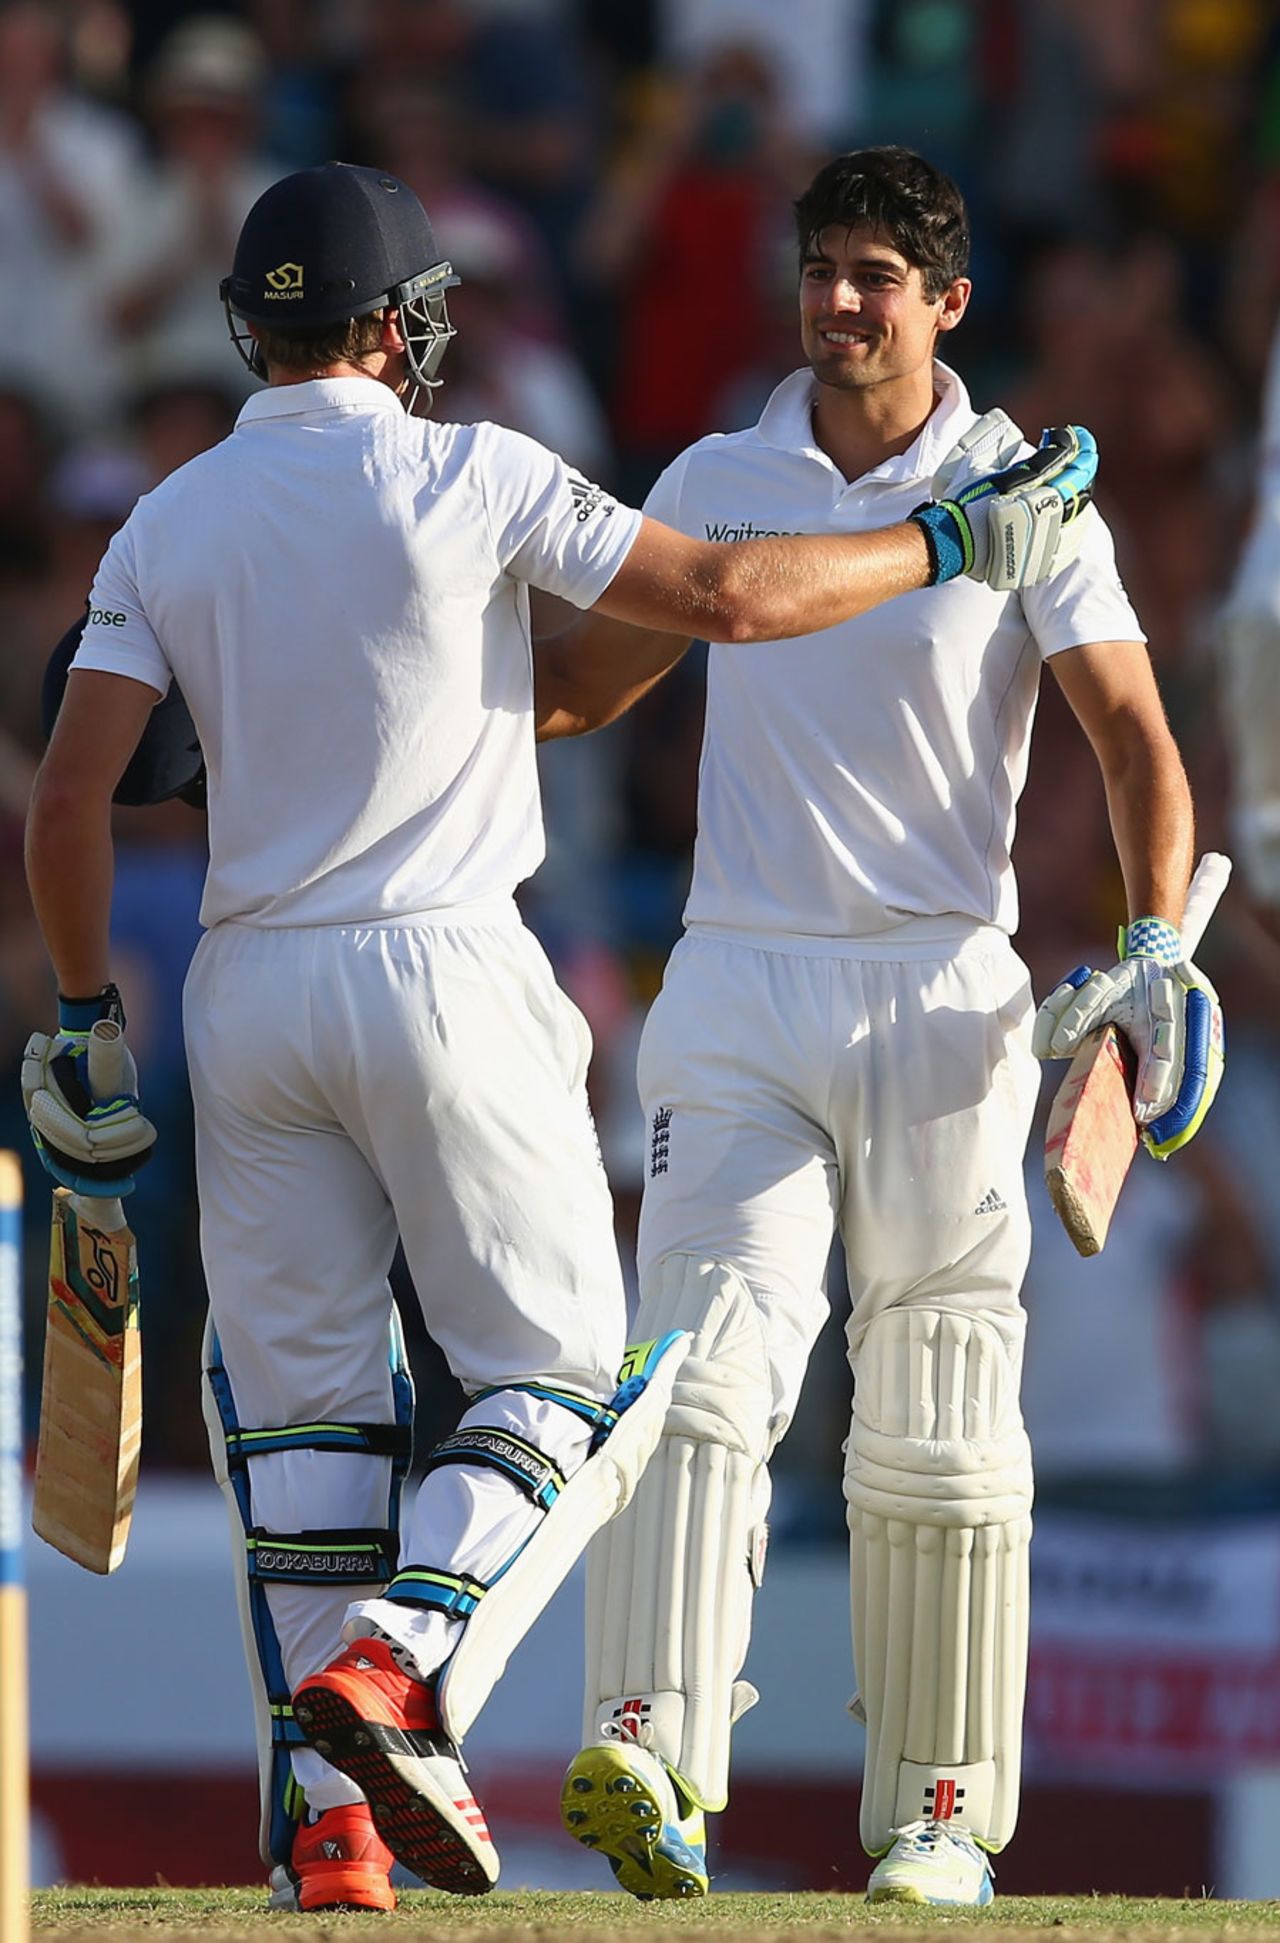 Alastair Cook gets a hug from Jos Buttler, West Indies v England, 3rd Test, Bridgetown, 1st day, May 1, 2015